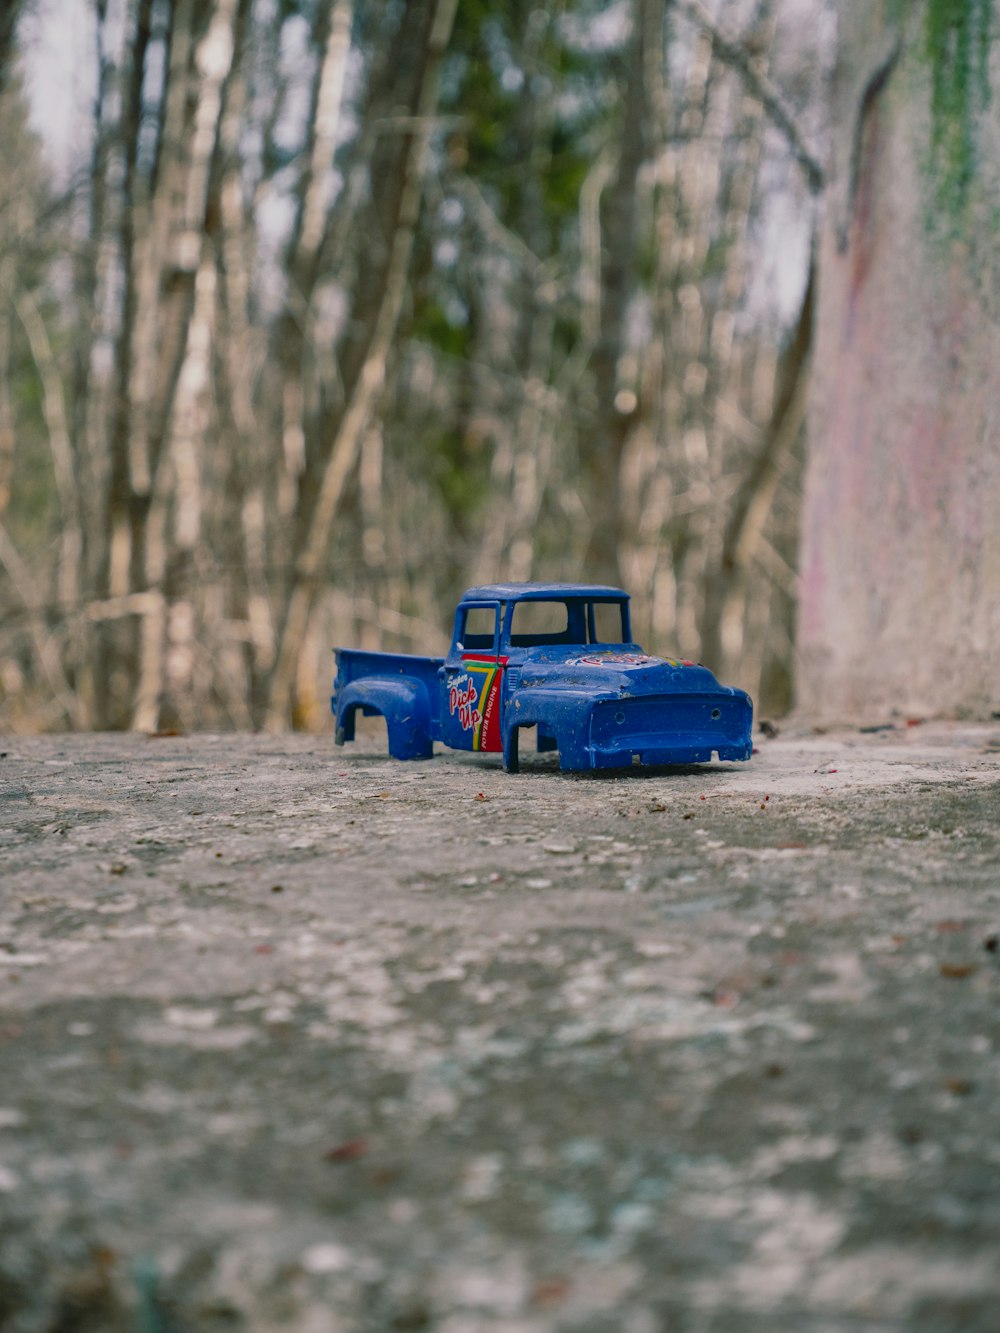 a toy truck sitting in the middle of a forest